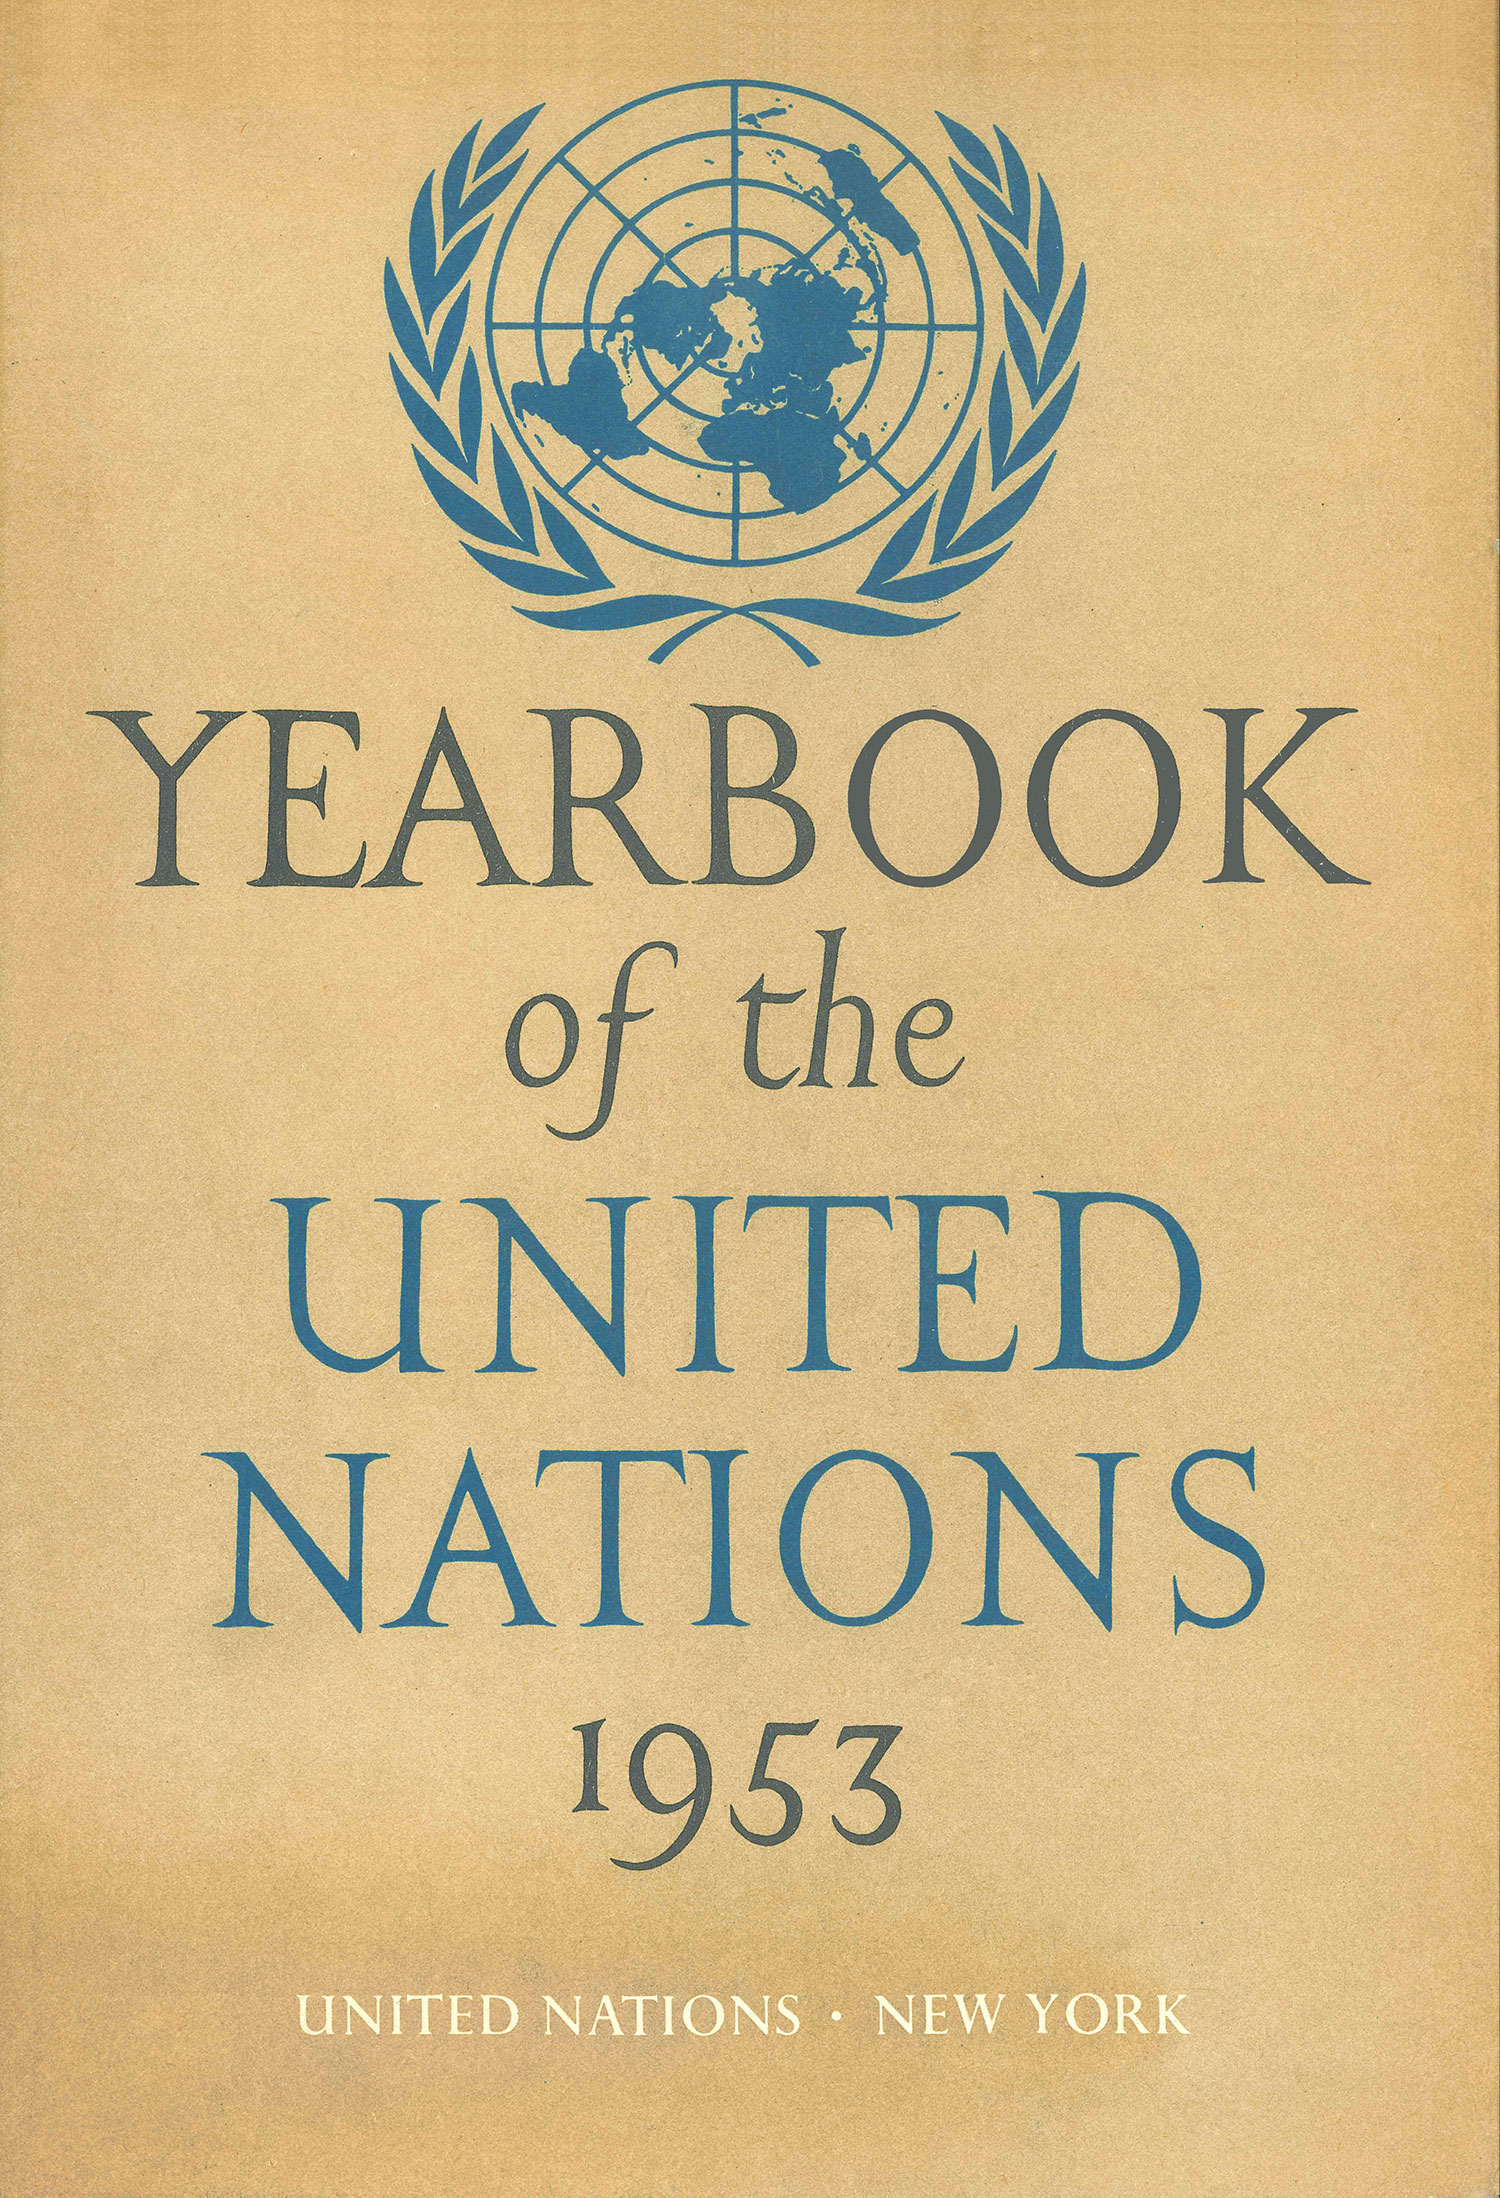 image of Yearbook of the United Nations 1953